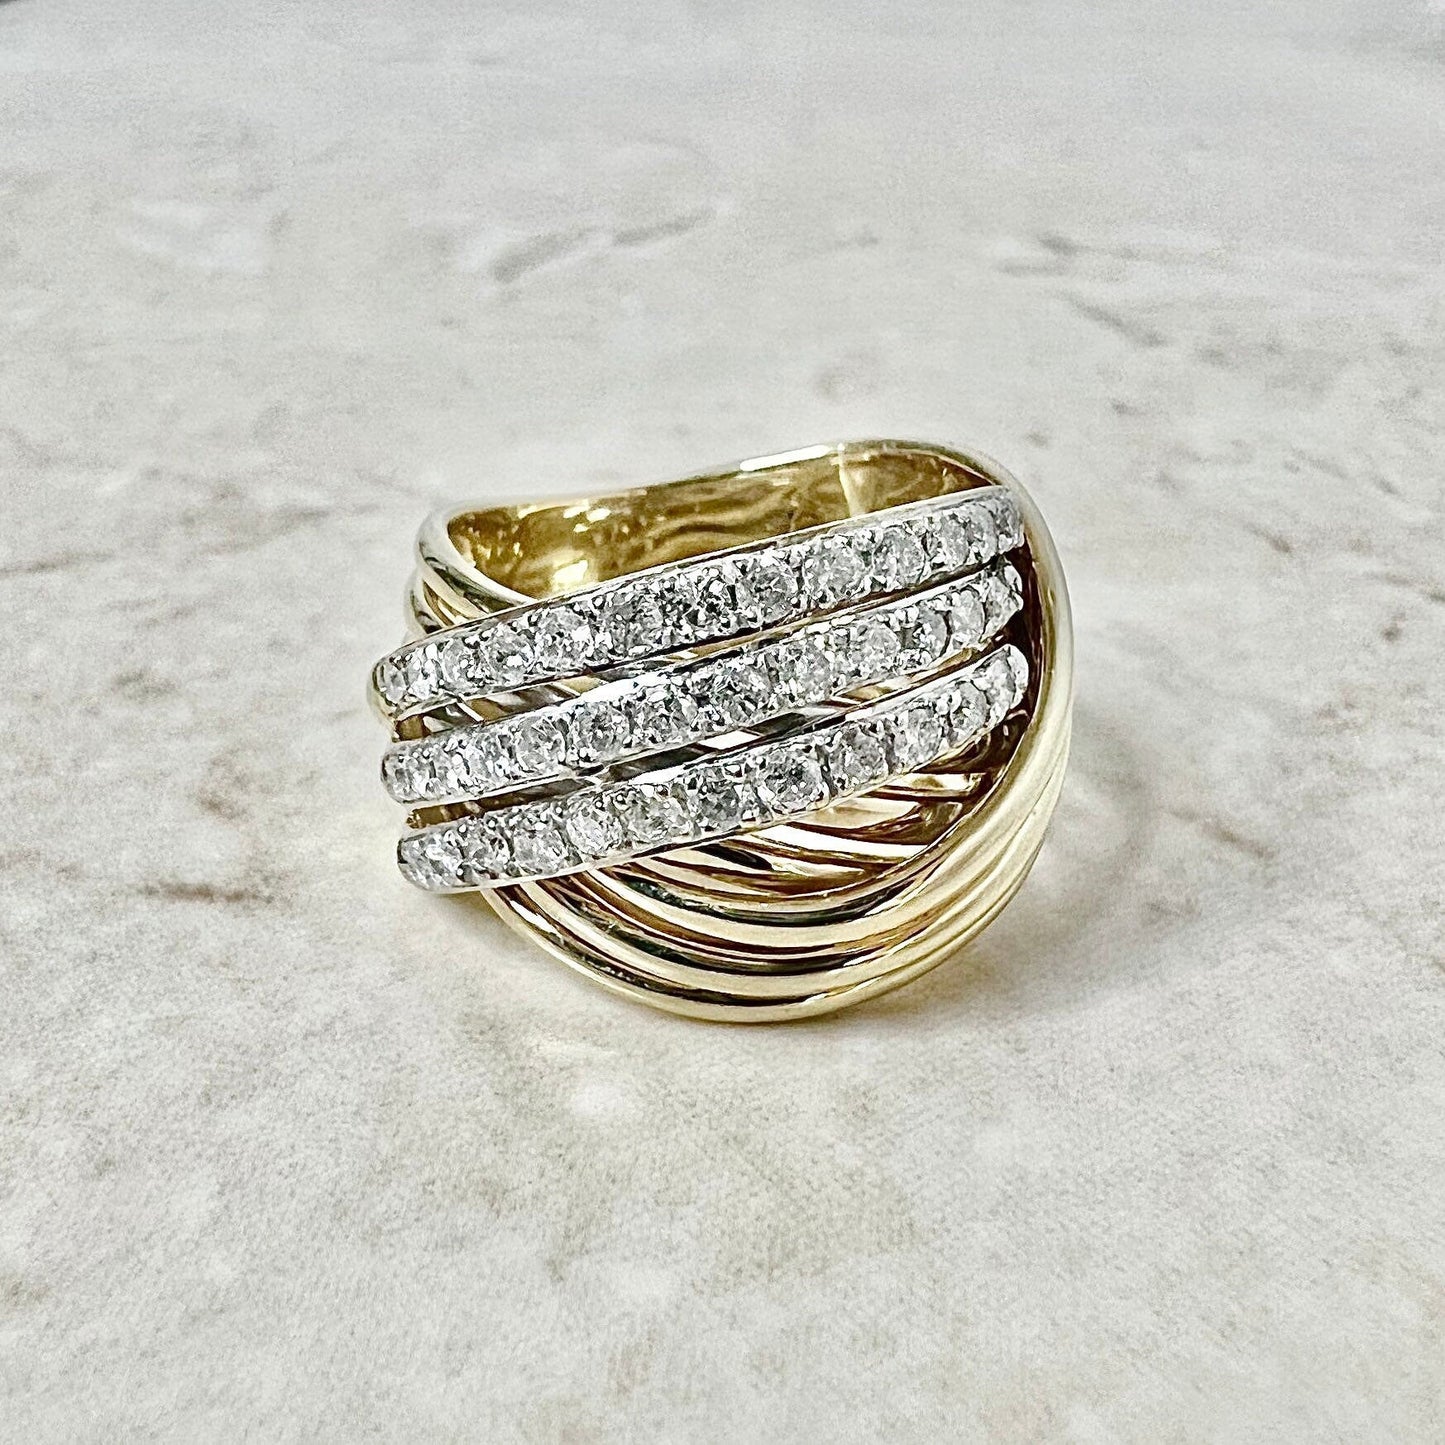 Vintage 14K Diamond Crossover Band Ring - 3 Row Yellow Gold Diamond Ring - Diamond Cocktail Ring - Two Tone Gold - Birthday Gift For Her